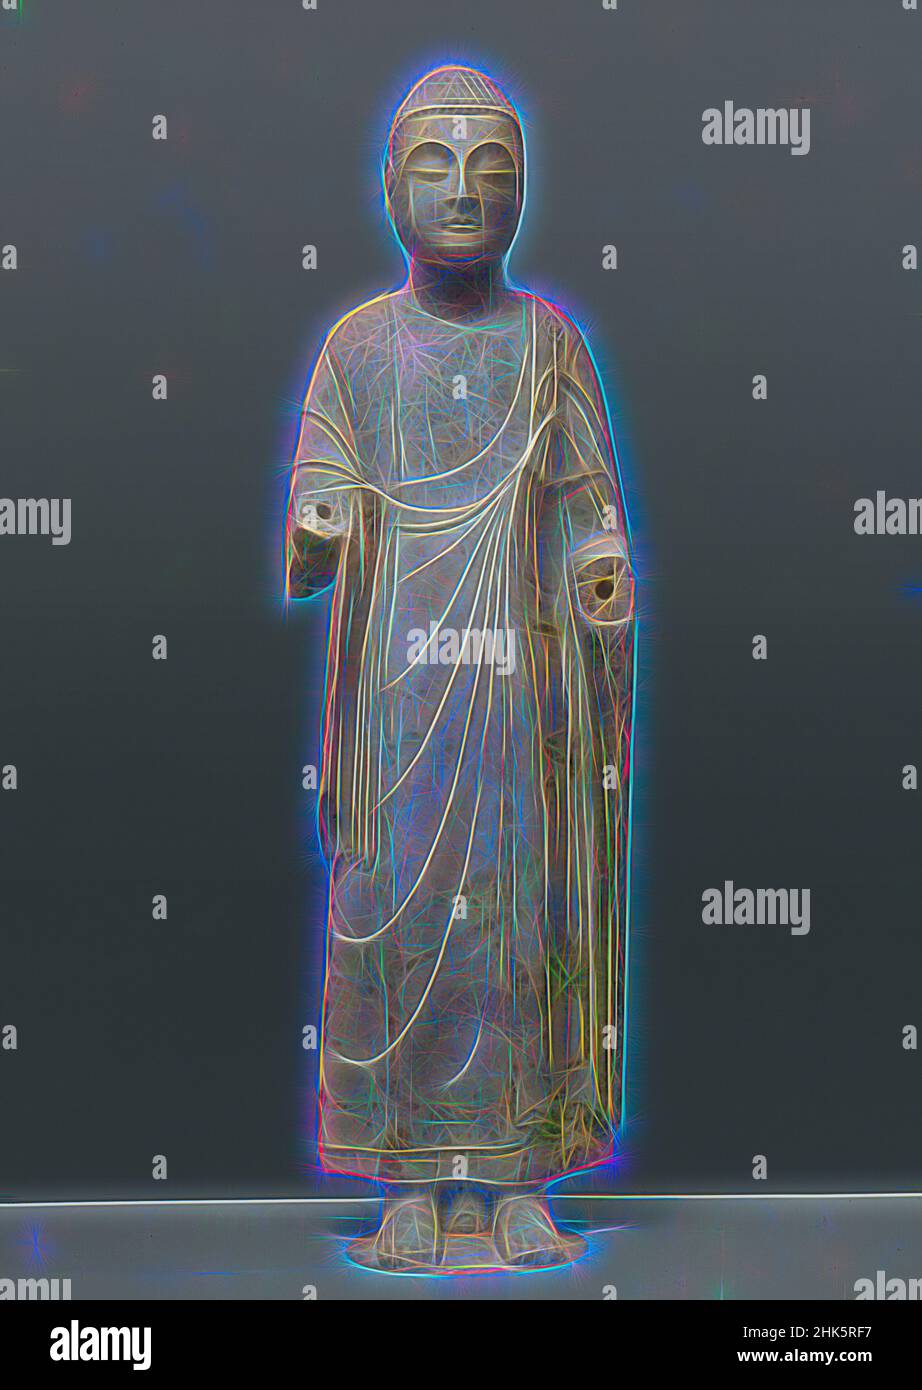 Inspired by Standing Sâkyamuni Buddha, Chinese, Northern Qi dynasty, 550–577, or Sui dynasty, 581–618, late 6th century, Marble with traces of pigment, Made in Shanxi province, China, Asia, Sculpture, stone & mineral, height from bottom of pedestal insert to top of head: 74 in. (188 cm, Reimagined by Artotop. Classic art reinvented with a modern twist. Design of warm cheerful glowing of brightness and light ray radiance. Photography inspired by surrealism and futurism, embracing dynamic energy of modern technology, movement, speed and revolutionize culture Stock Photo